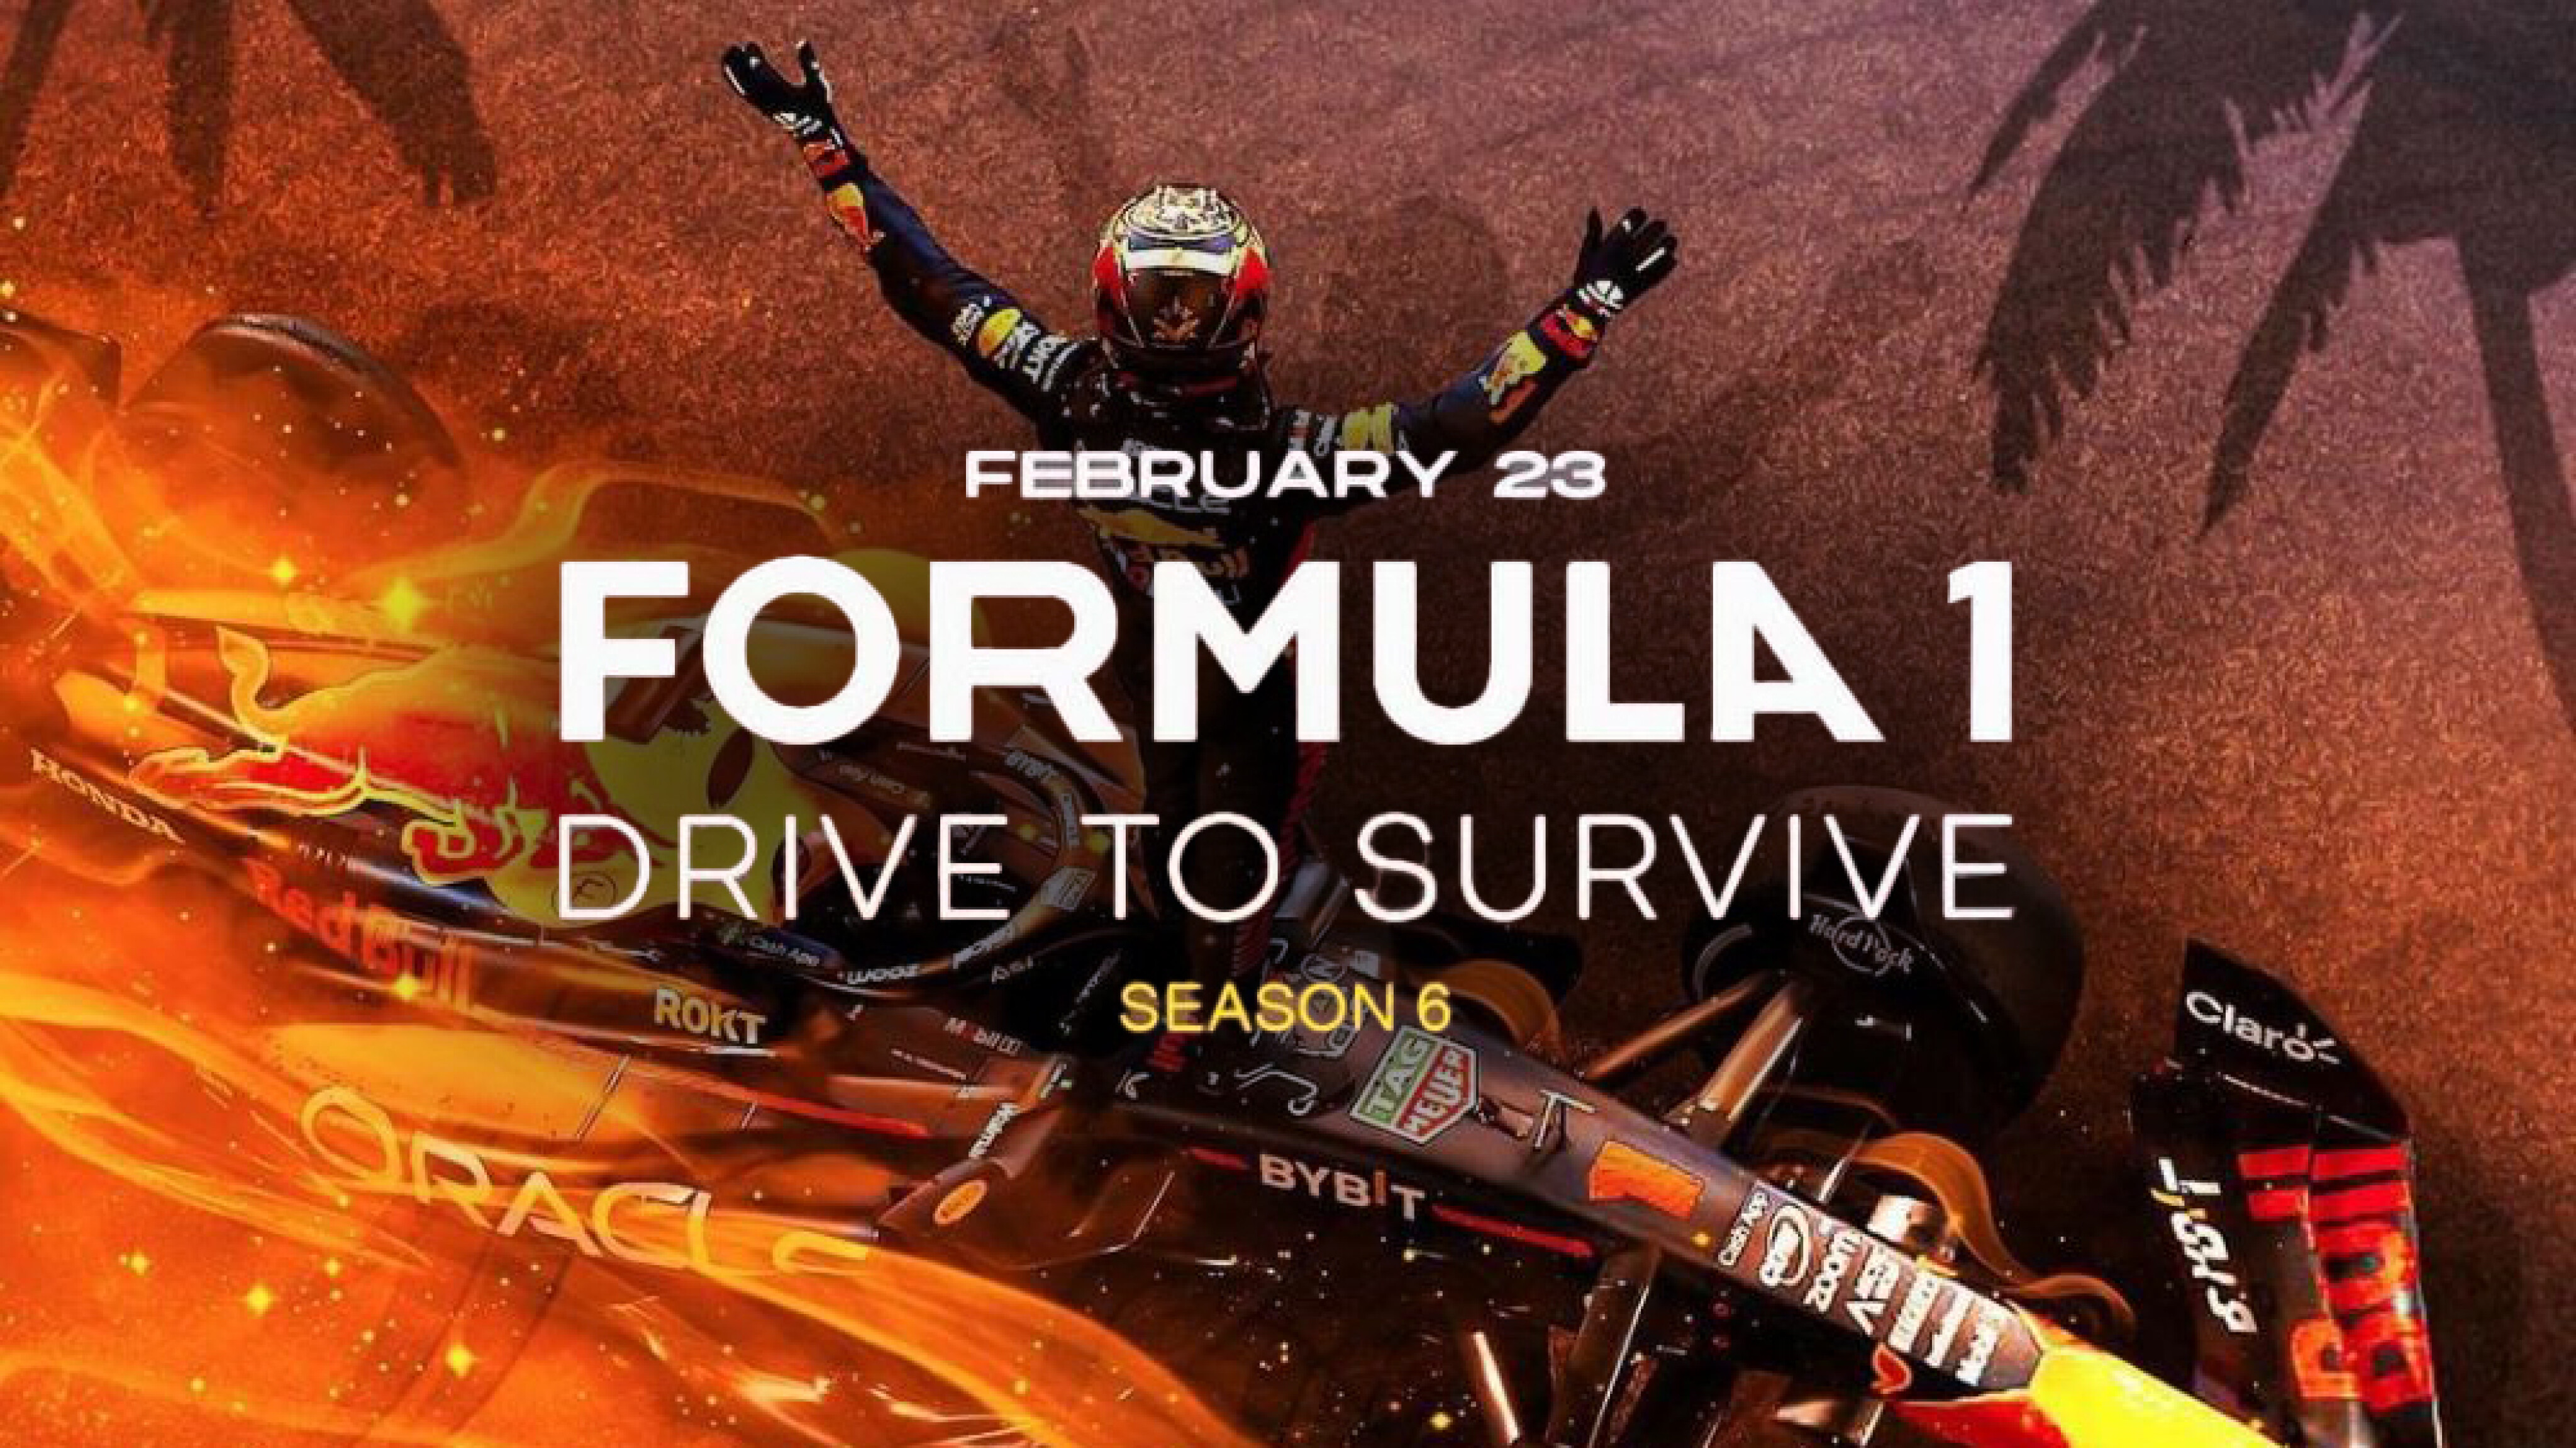 Drive to Survive returning in February on Netflix